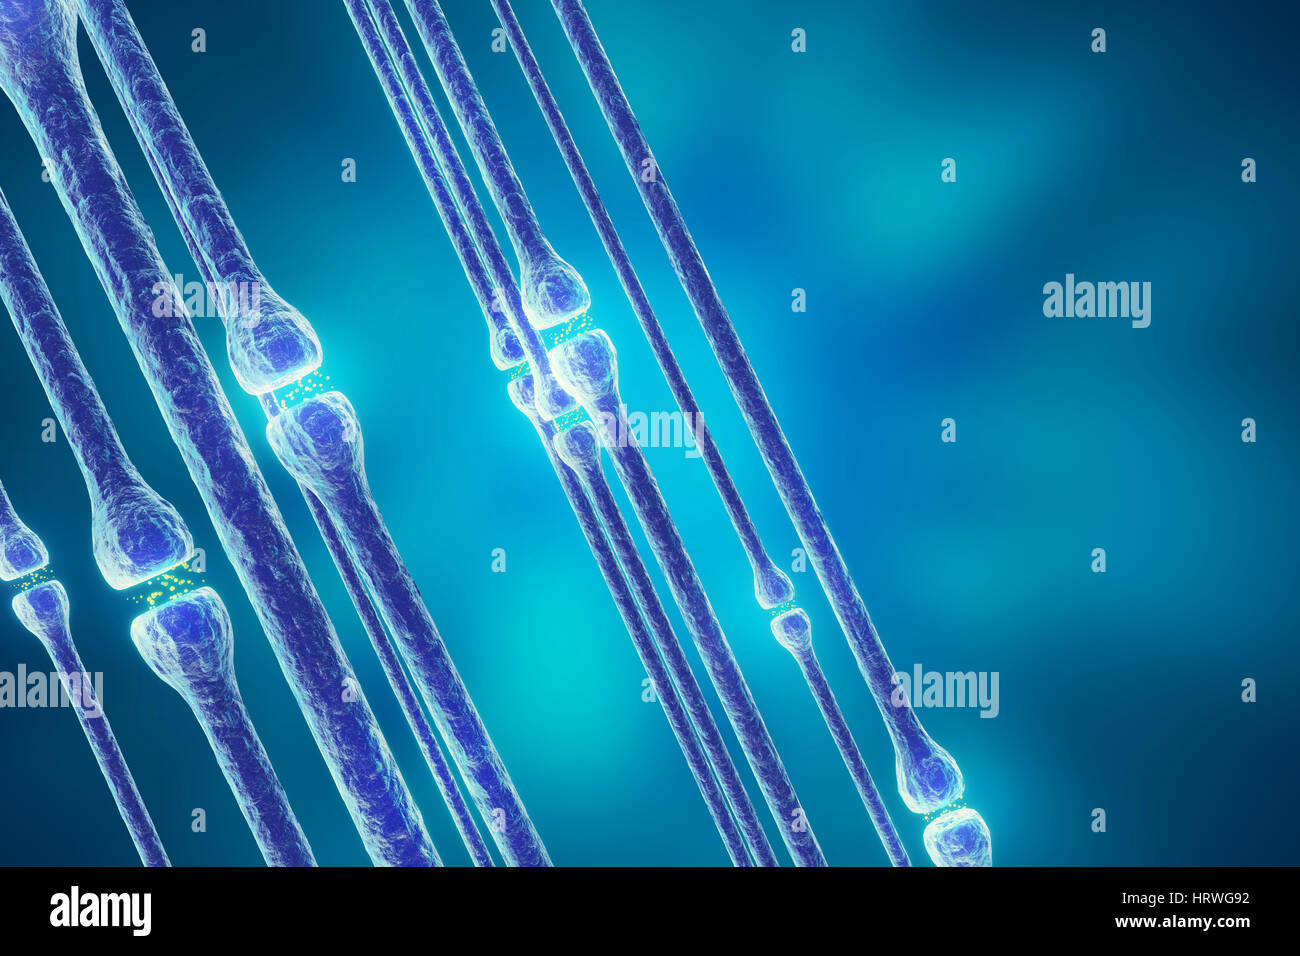 Synaptic transmission, human nervous system, 3d rendering Stock Photo